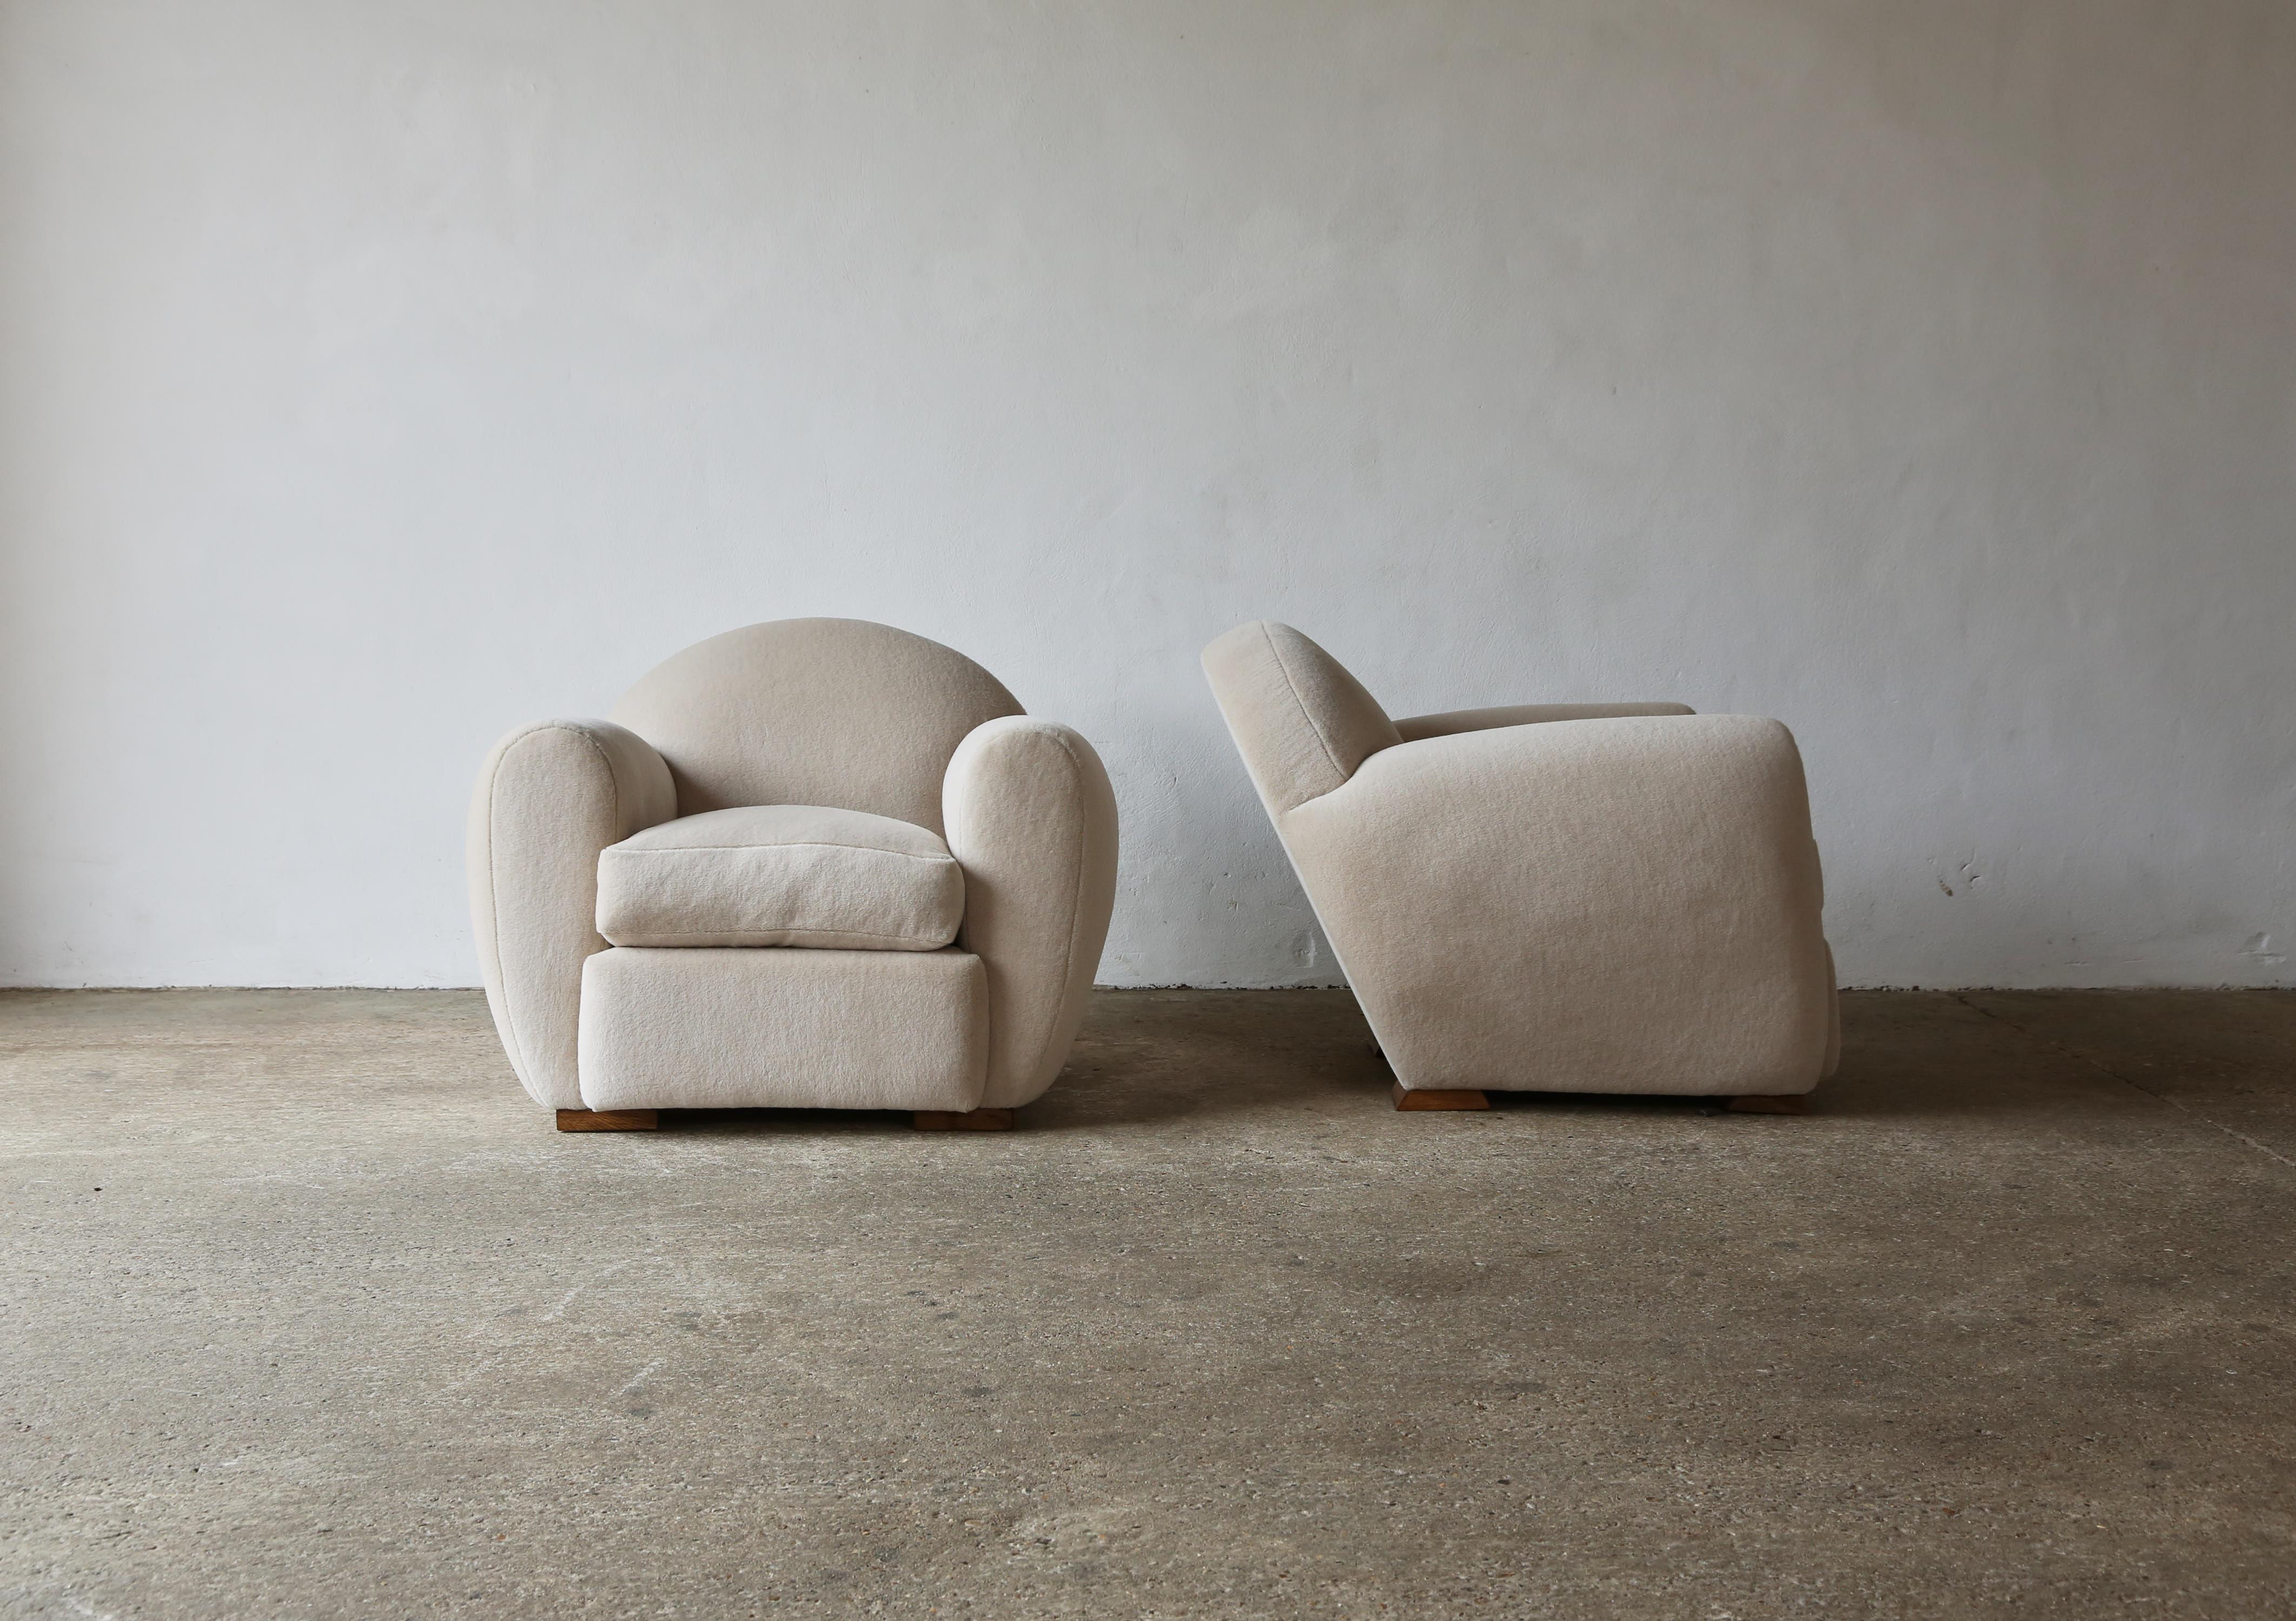 Superb pair of round, leaning modern club chairs, upholstered in pure Alpaca. High quality handmade beech frames and newly upholstered in a soft, ivory, premium 100% alpaca wool fabric. 

